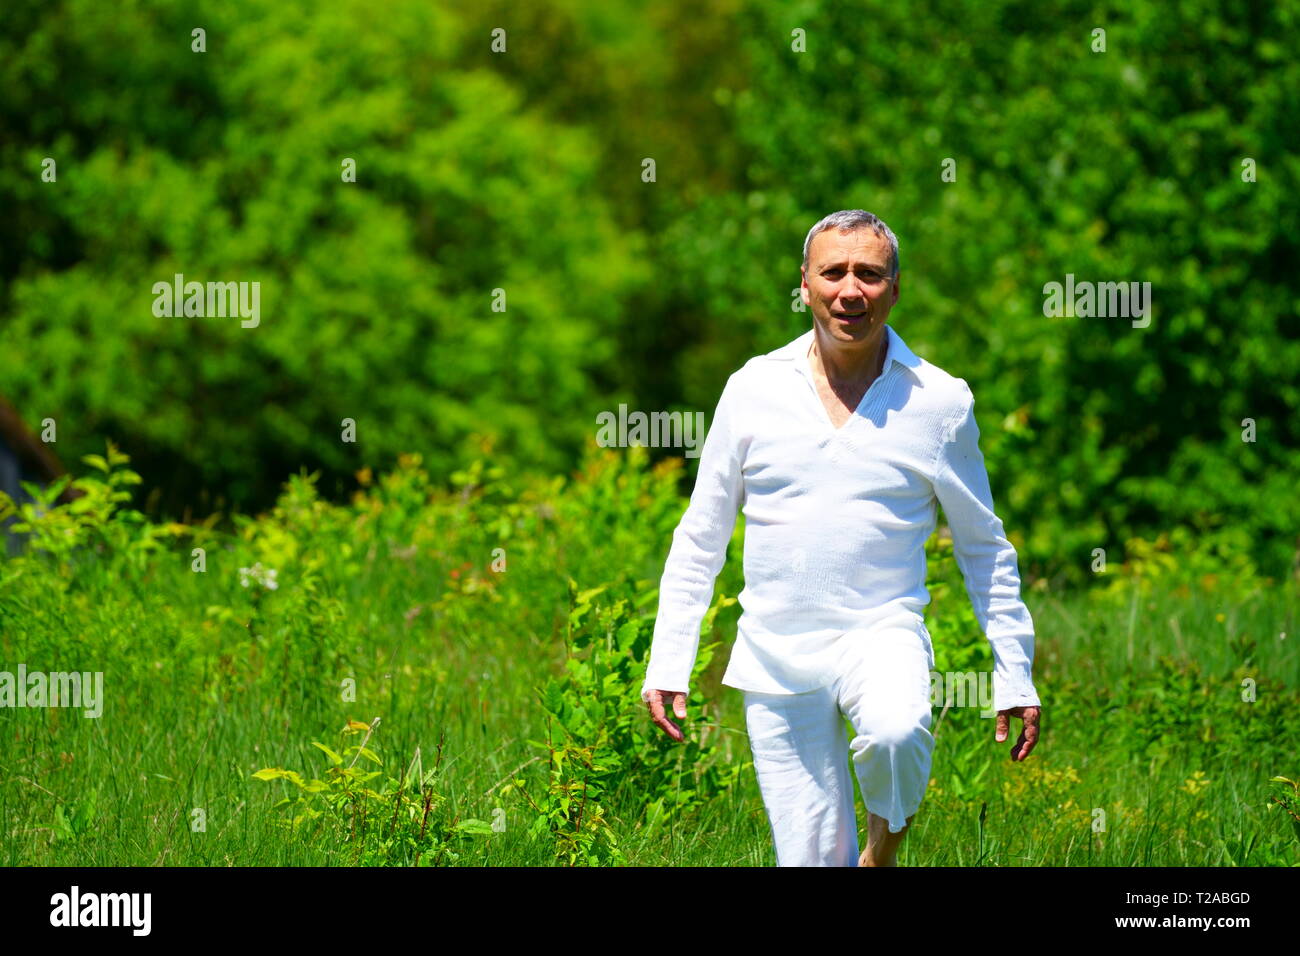 A man in white clothes walking in a field and touching flowers, surrounded by green. Stock Photo